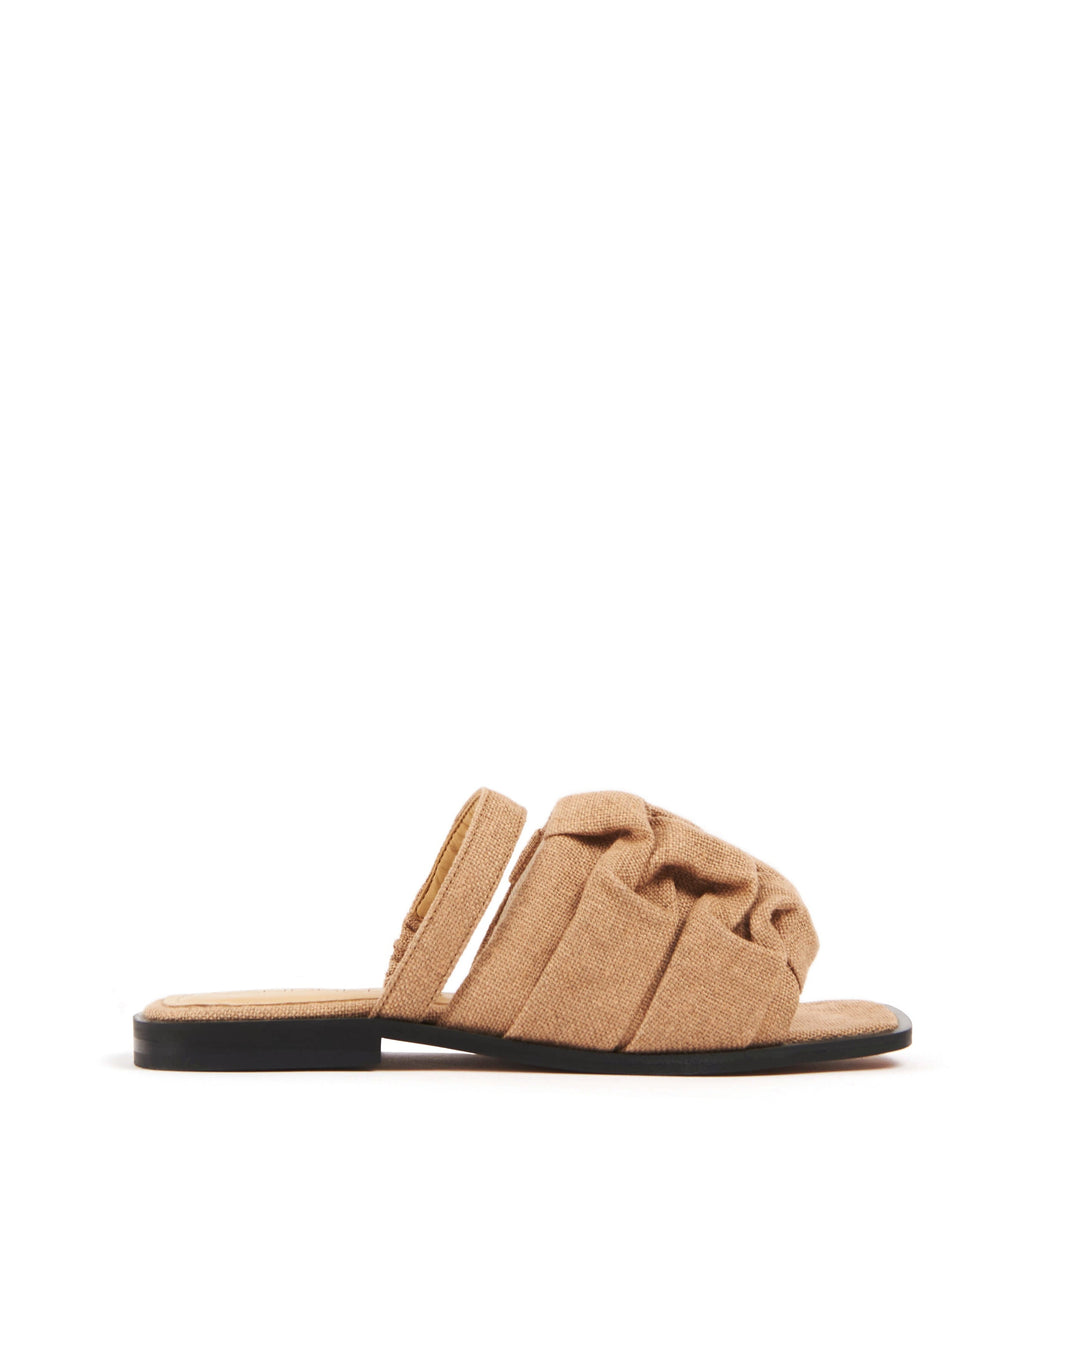 Vandrelaar Simone Linen Sandals in the colour beige / sand. Women's slider sandal mules for spring summer. Made from linen and eco-friendly materials. 100% vegan cruelty-free sandals for women. Square toe sandals with padding for extra comfort.